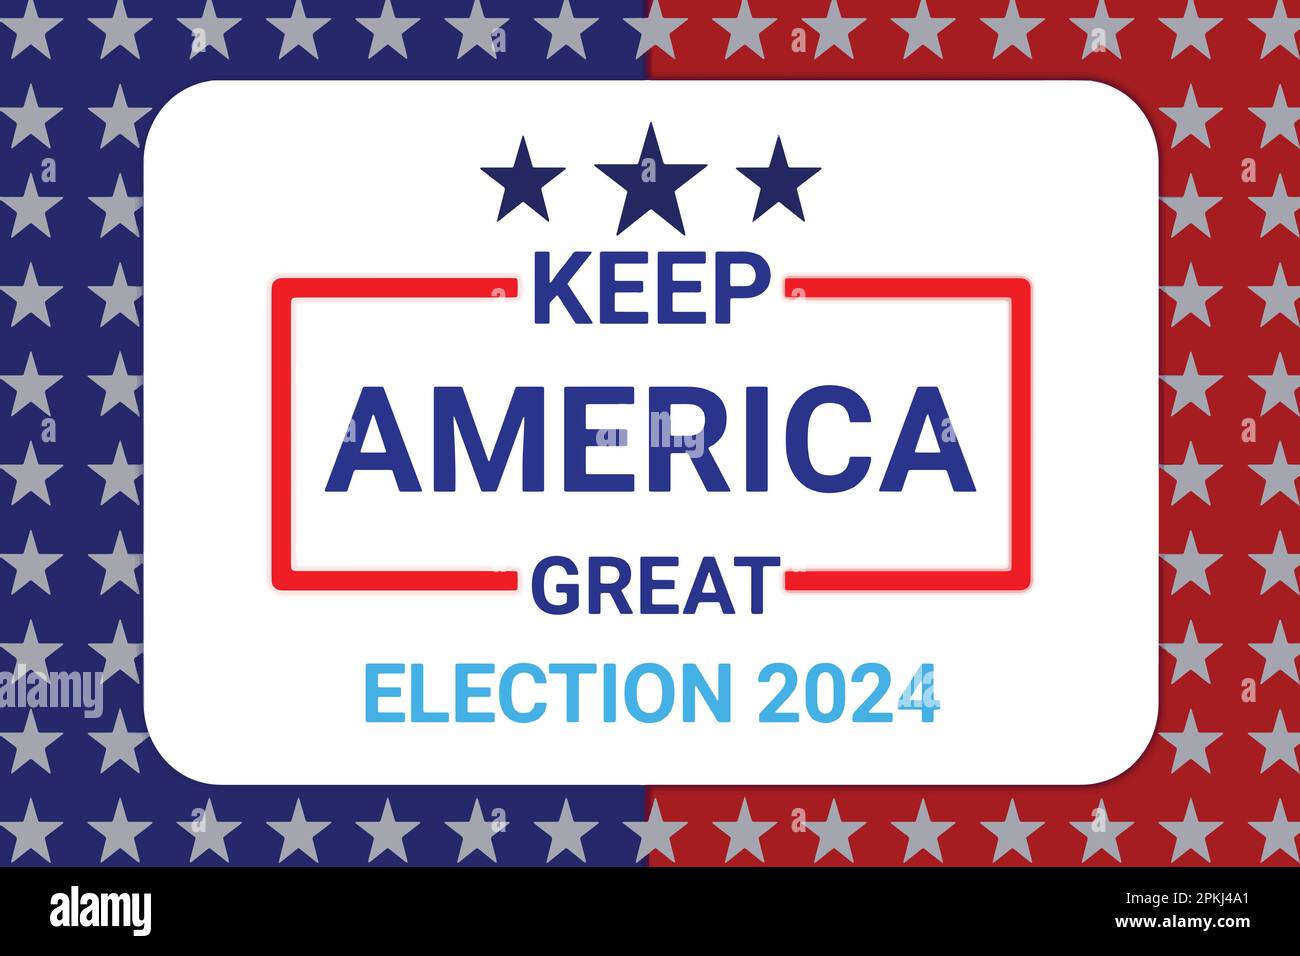 Keep America Great Election 2024. United States of America Presidential